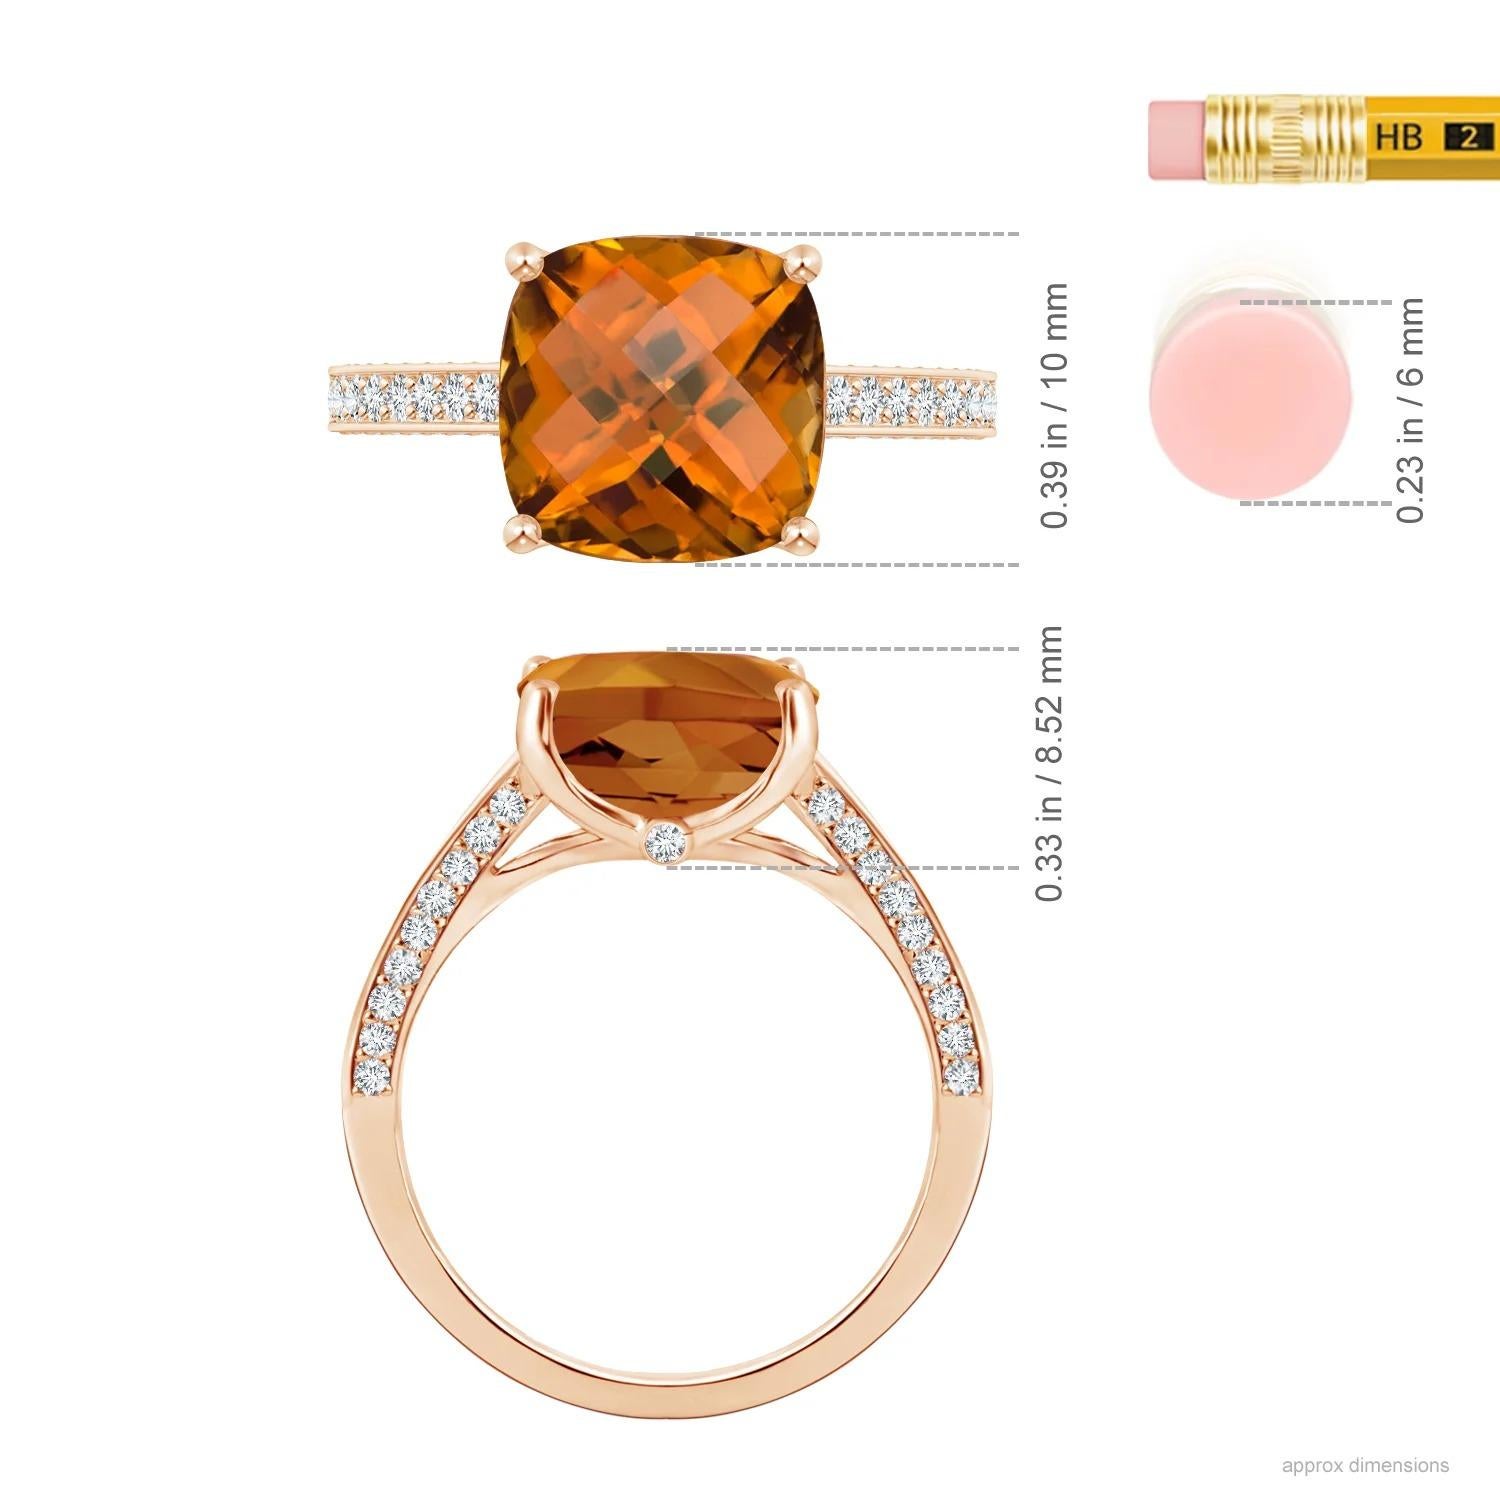 For Sale:  GIA Certified Natural Cushion Orange Zircon Cocktail Ring in Rose Gold 5